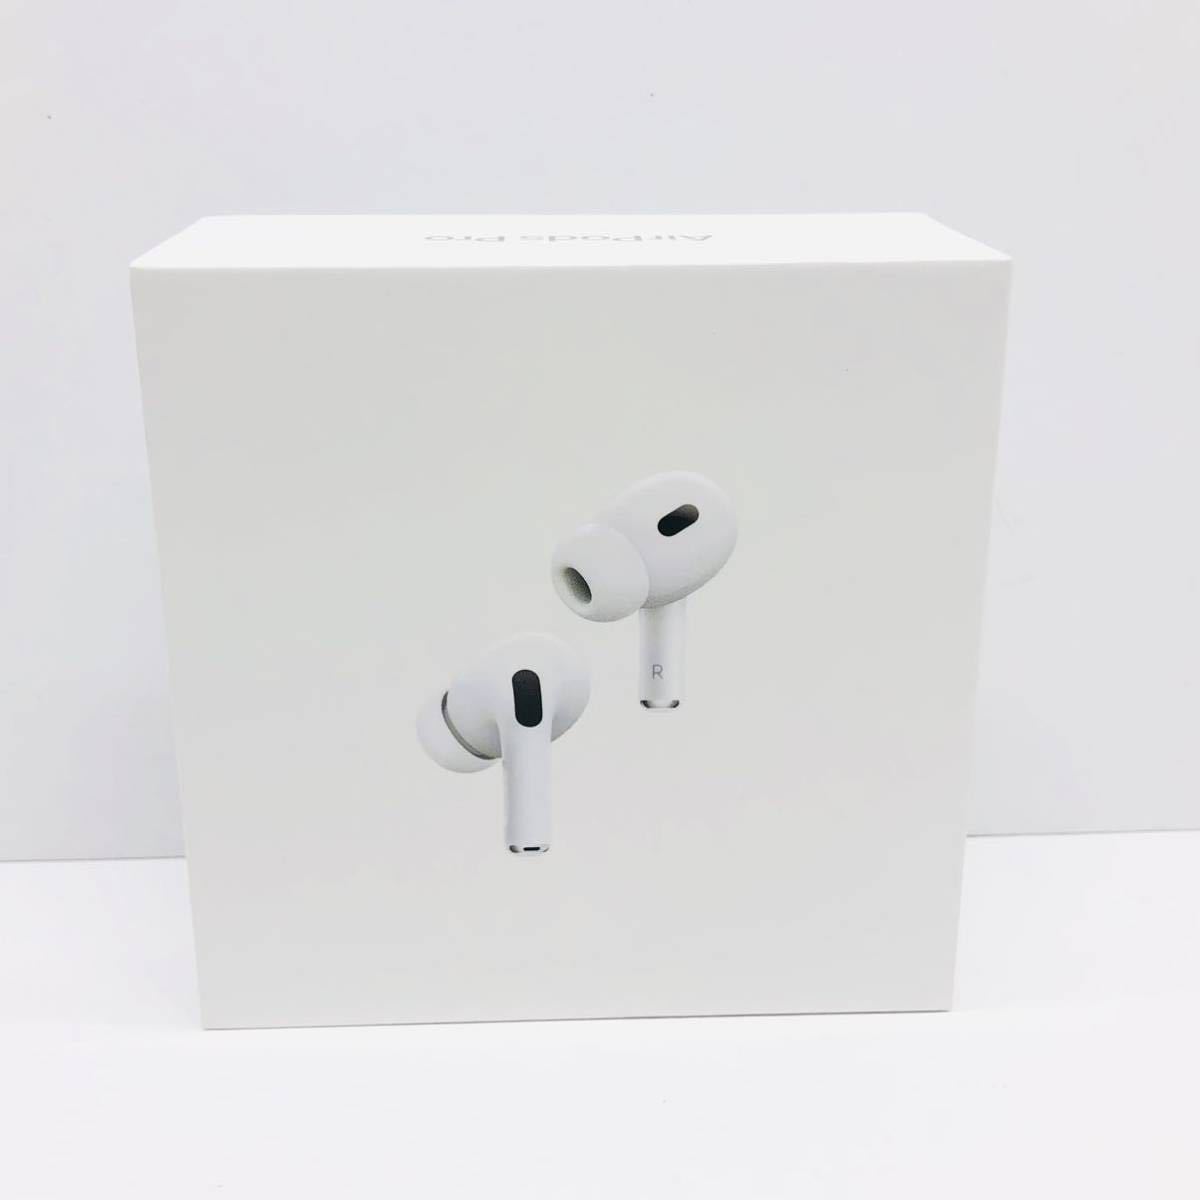 Apple◇イヤホンAirPods Pro 第2世代MQDJ/A A/A/A